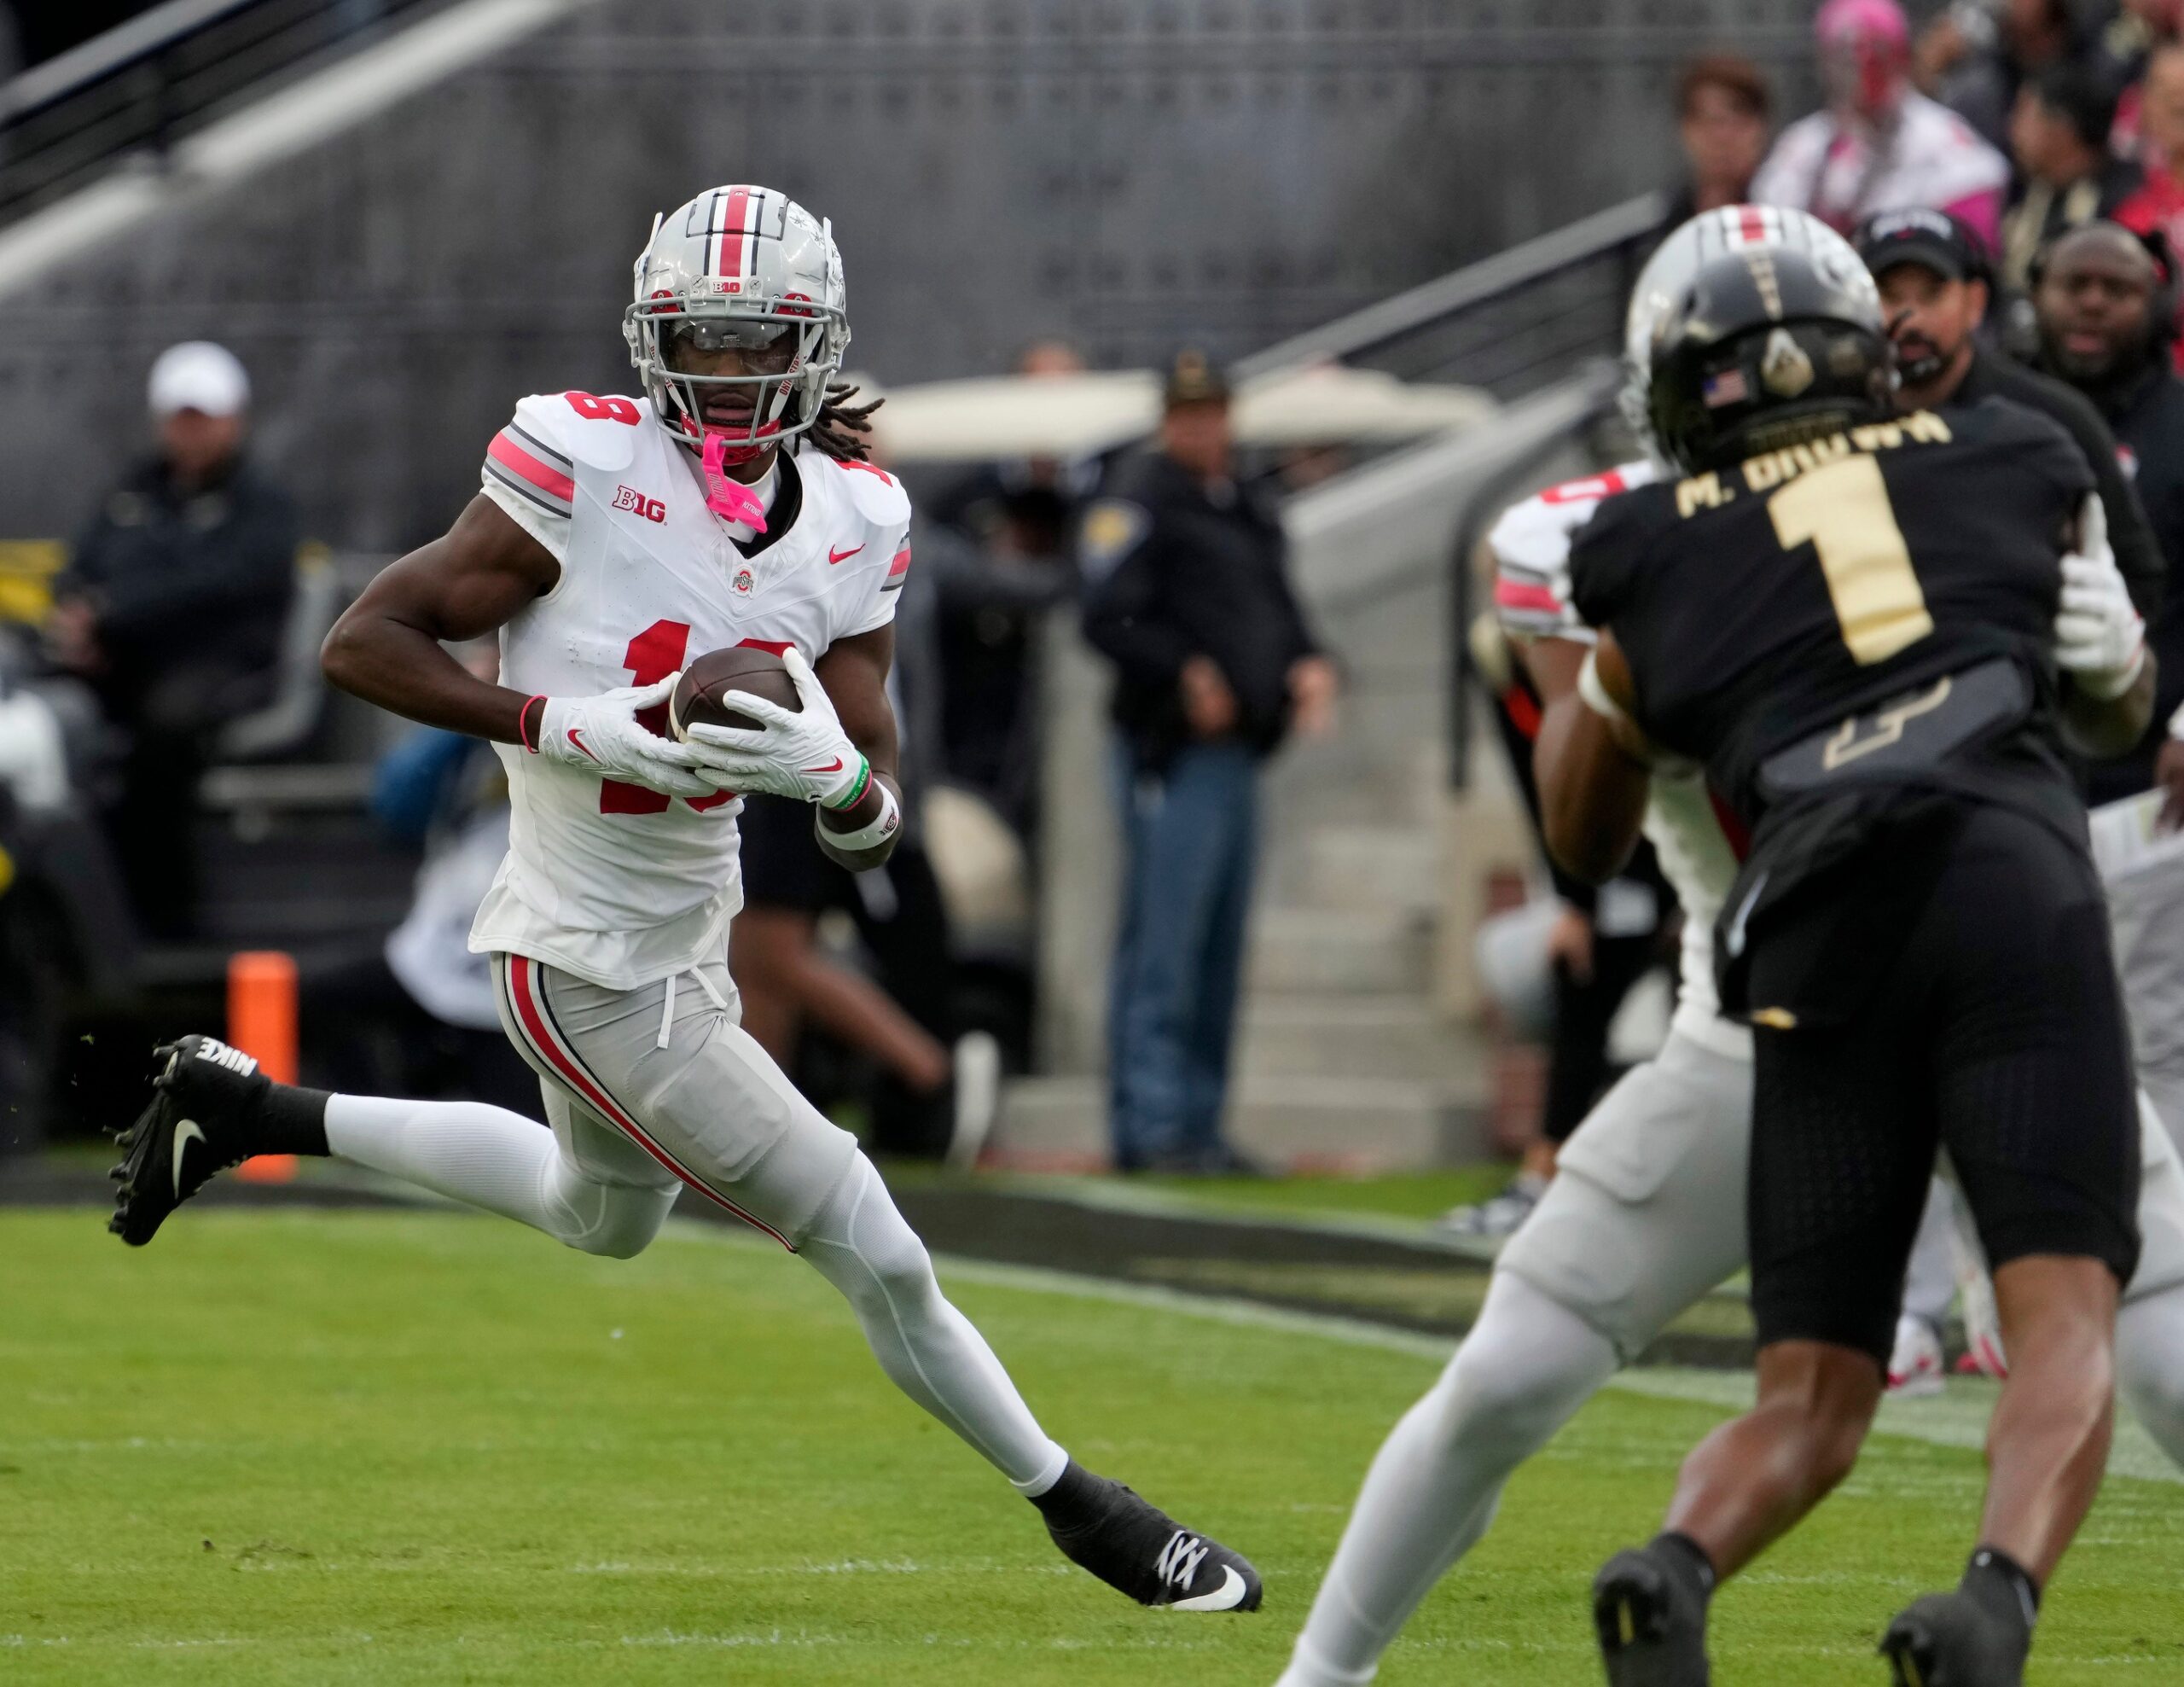 The play of Ohio State at Purdue has given plenty of reasons for optimism heading into a crucial matchup against Penn State.